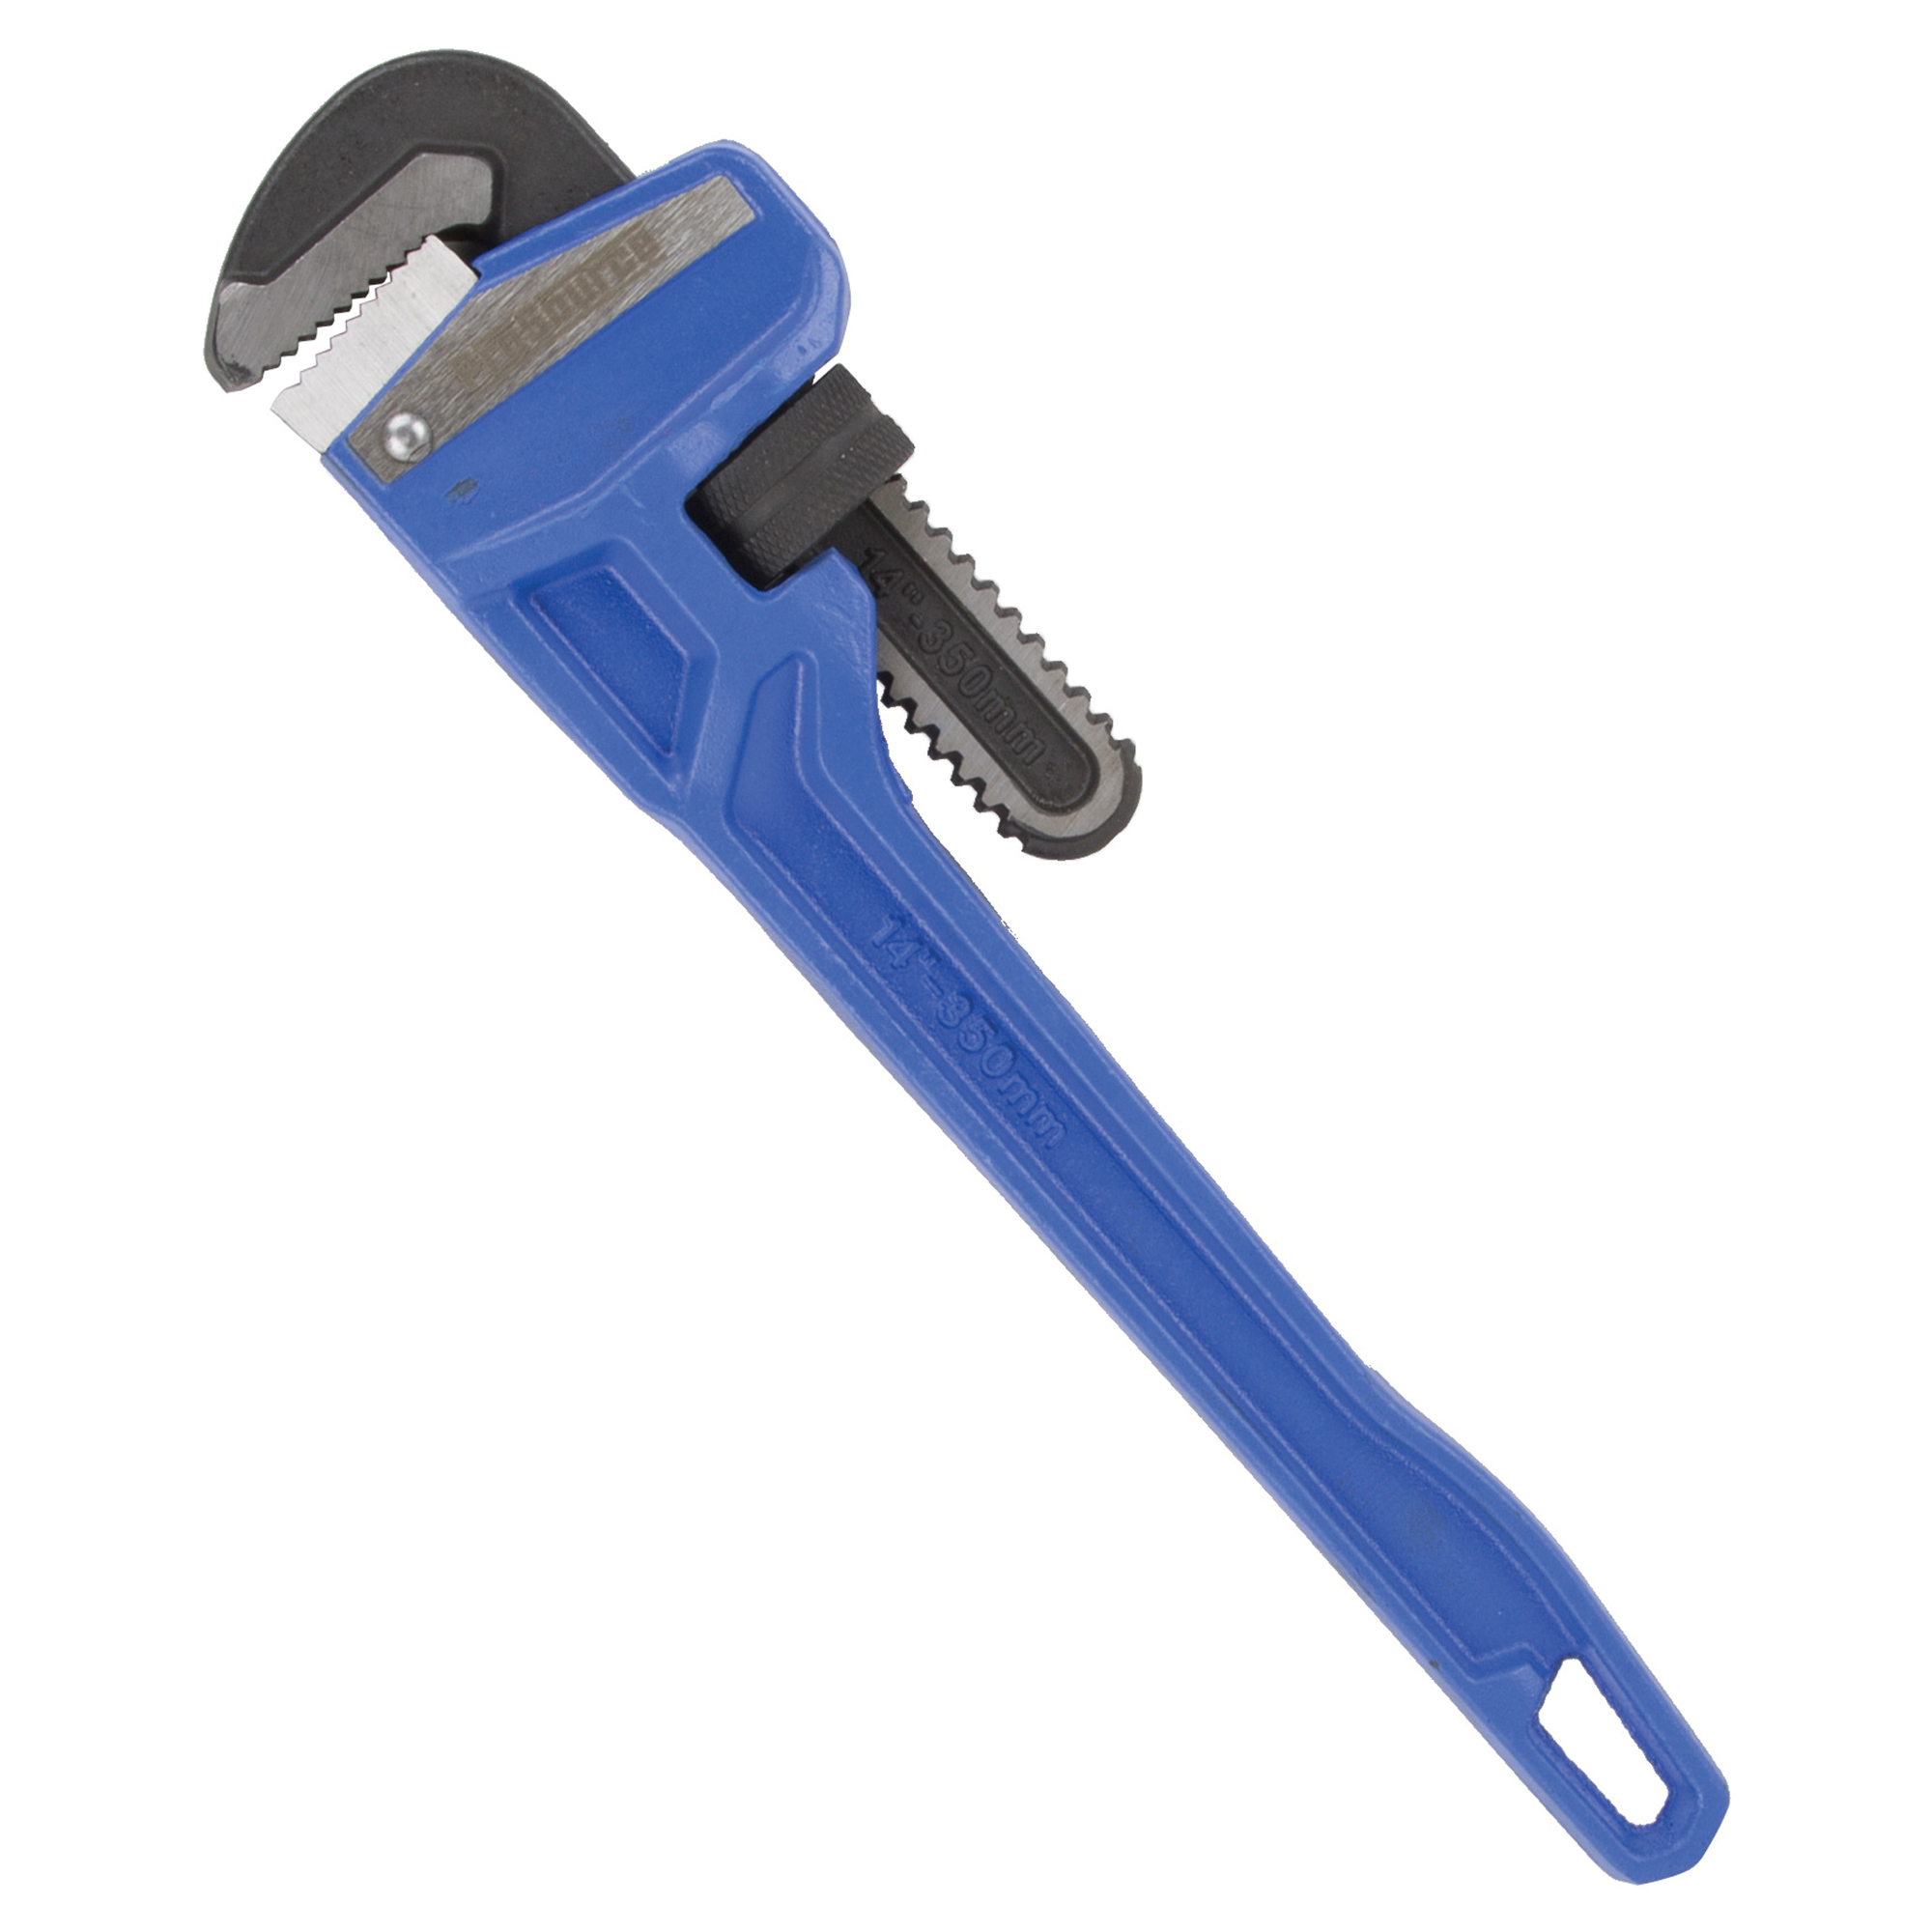 JL40114 Pipe Wrench, 38 mm Jaw, 14 in L, Serrated Jaw, Die-Cast Carbon Steel, Powder-Coated, Heavy-Duty Handle